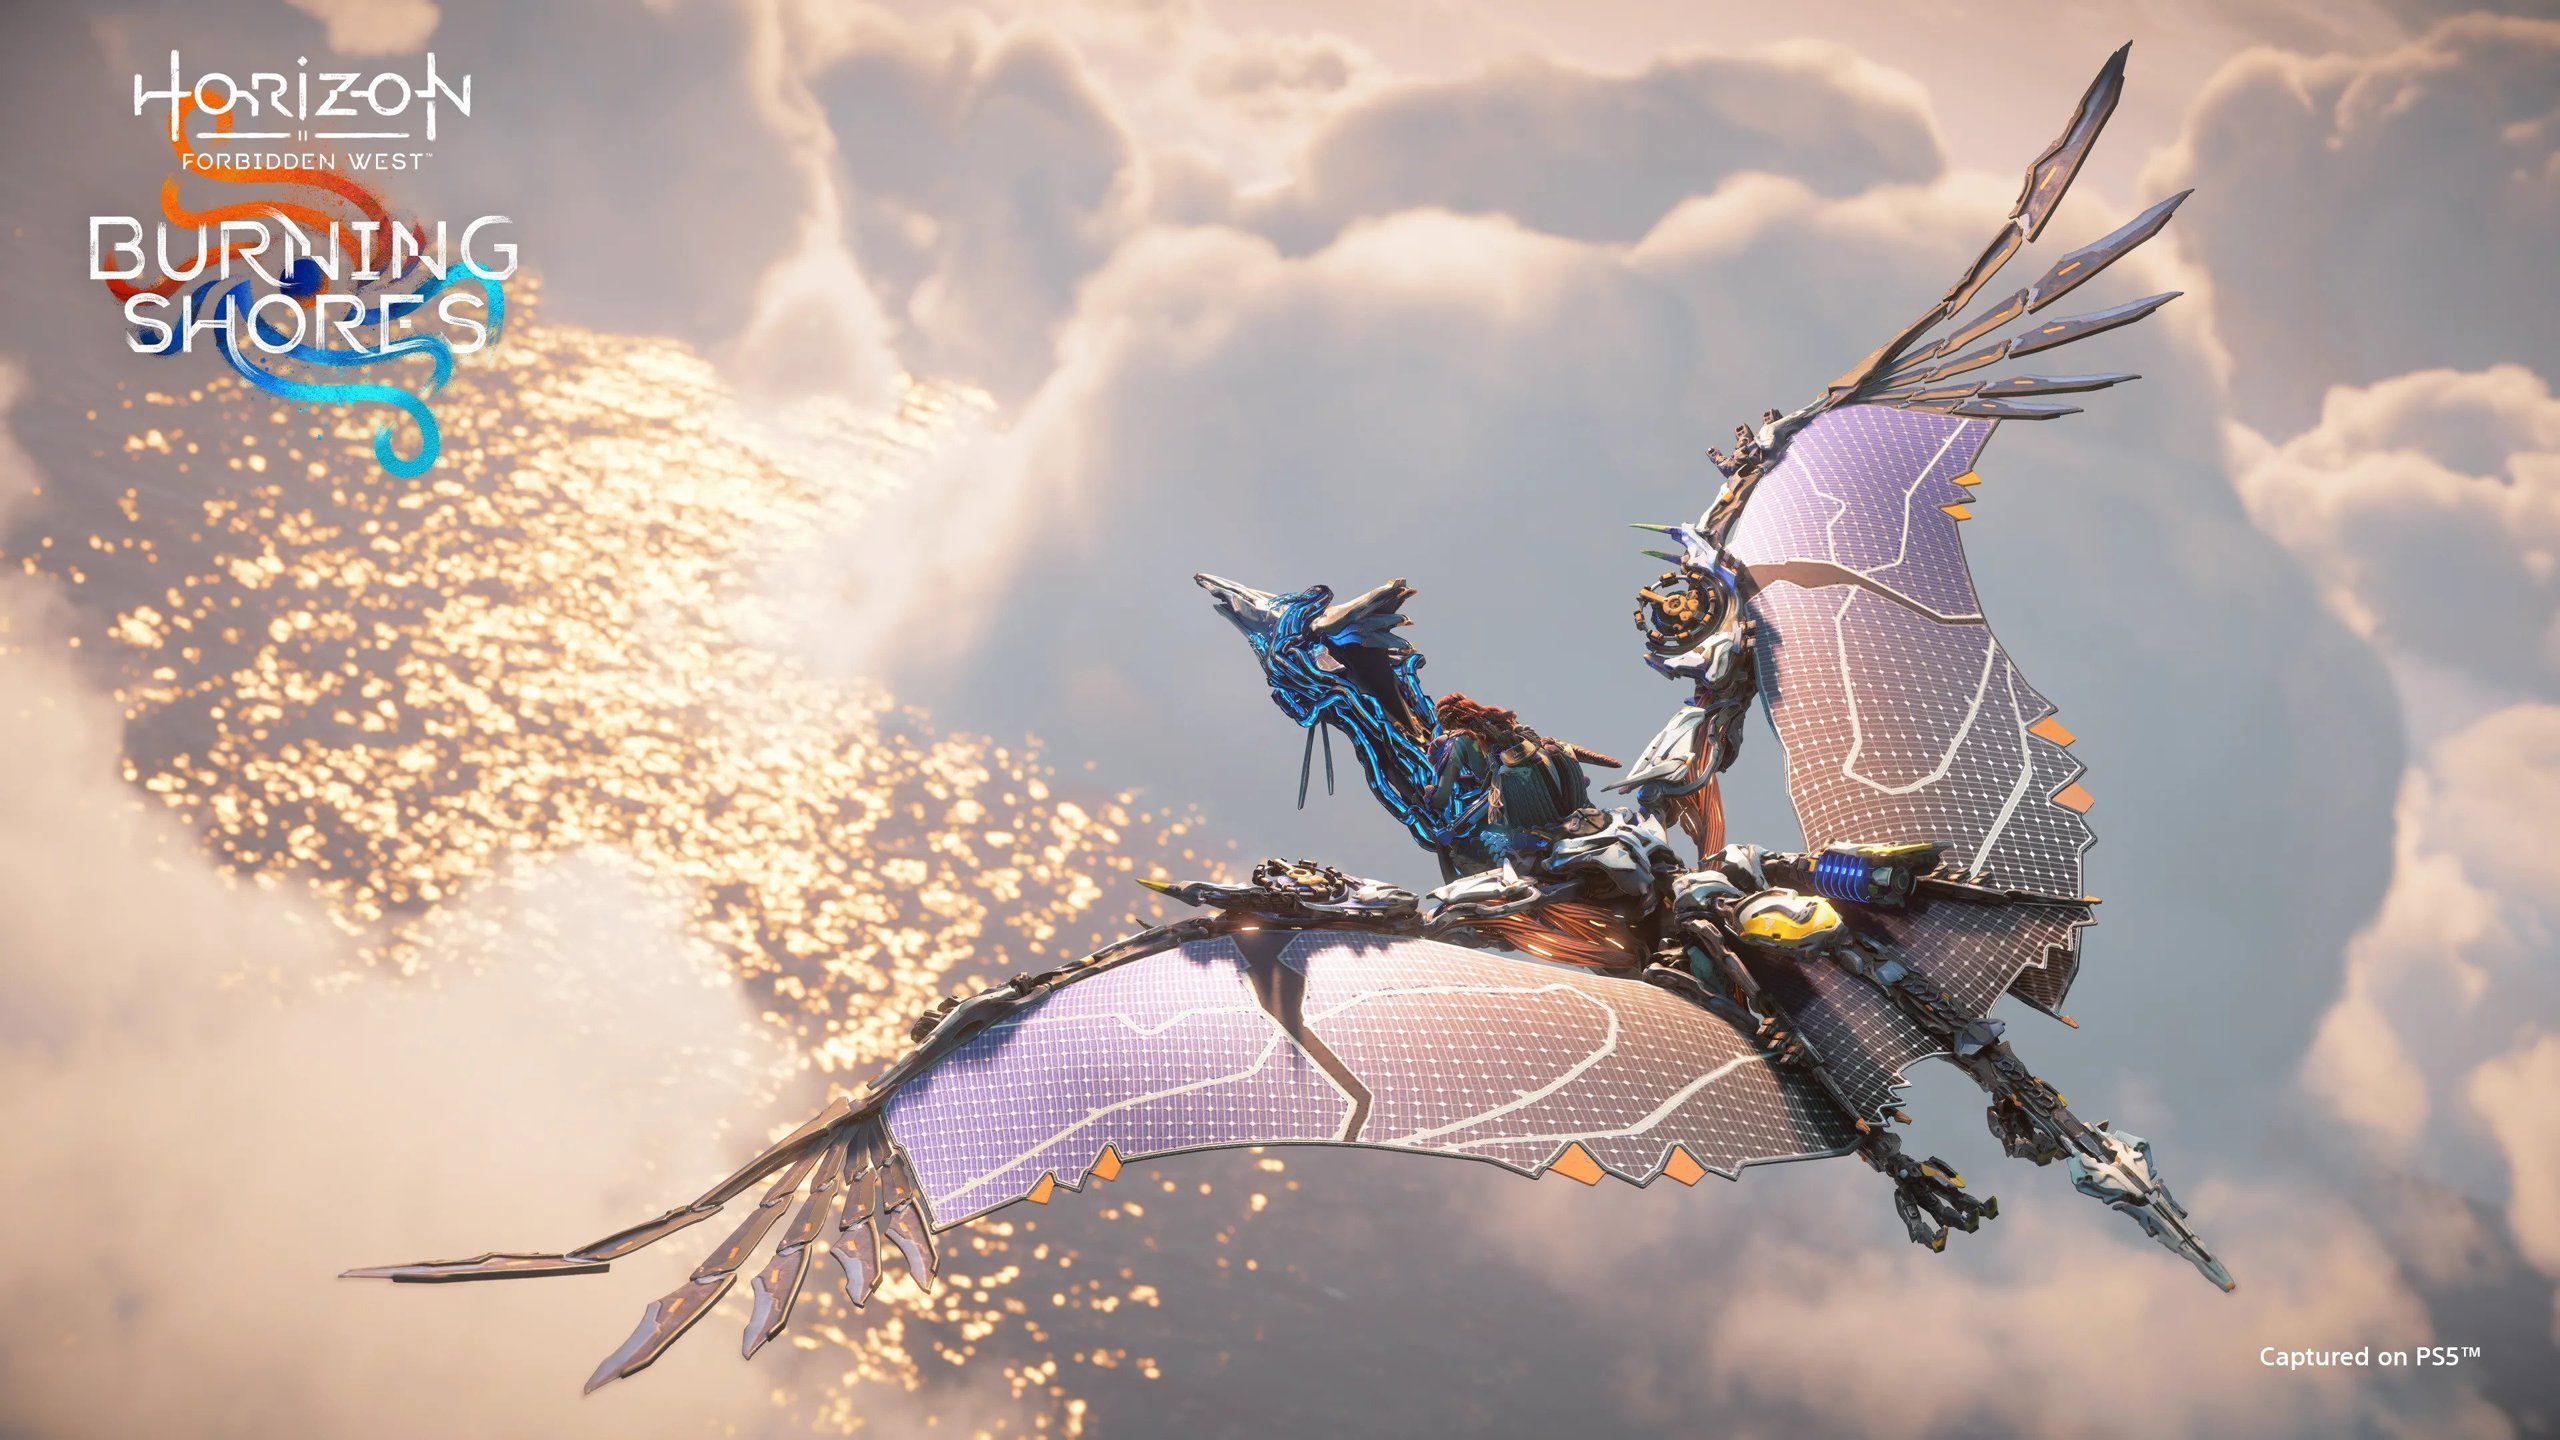 An aerial shot of Aloy on the back of a Sunwing, flying among the clouds in Horizon Forbidden West: Burning Shores.